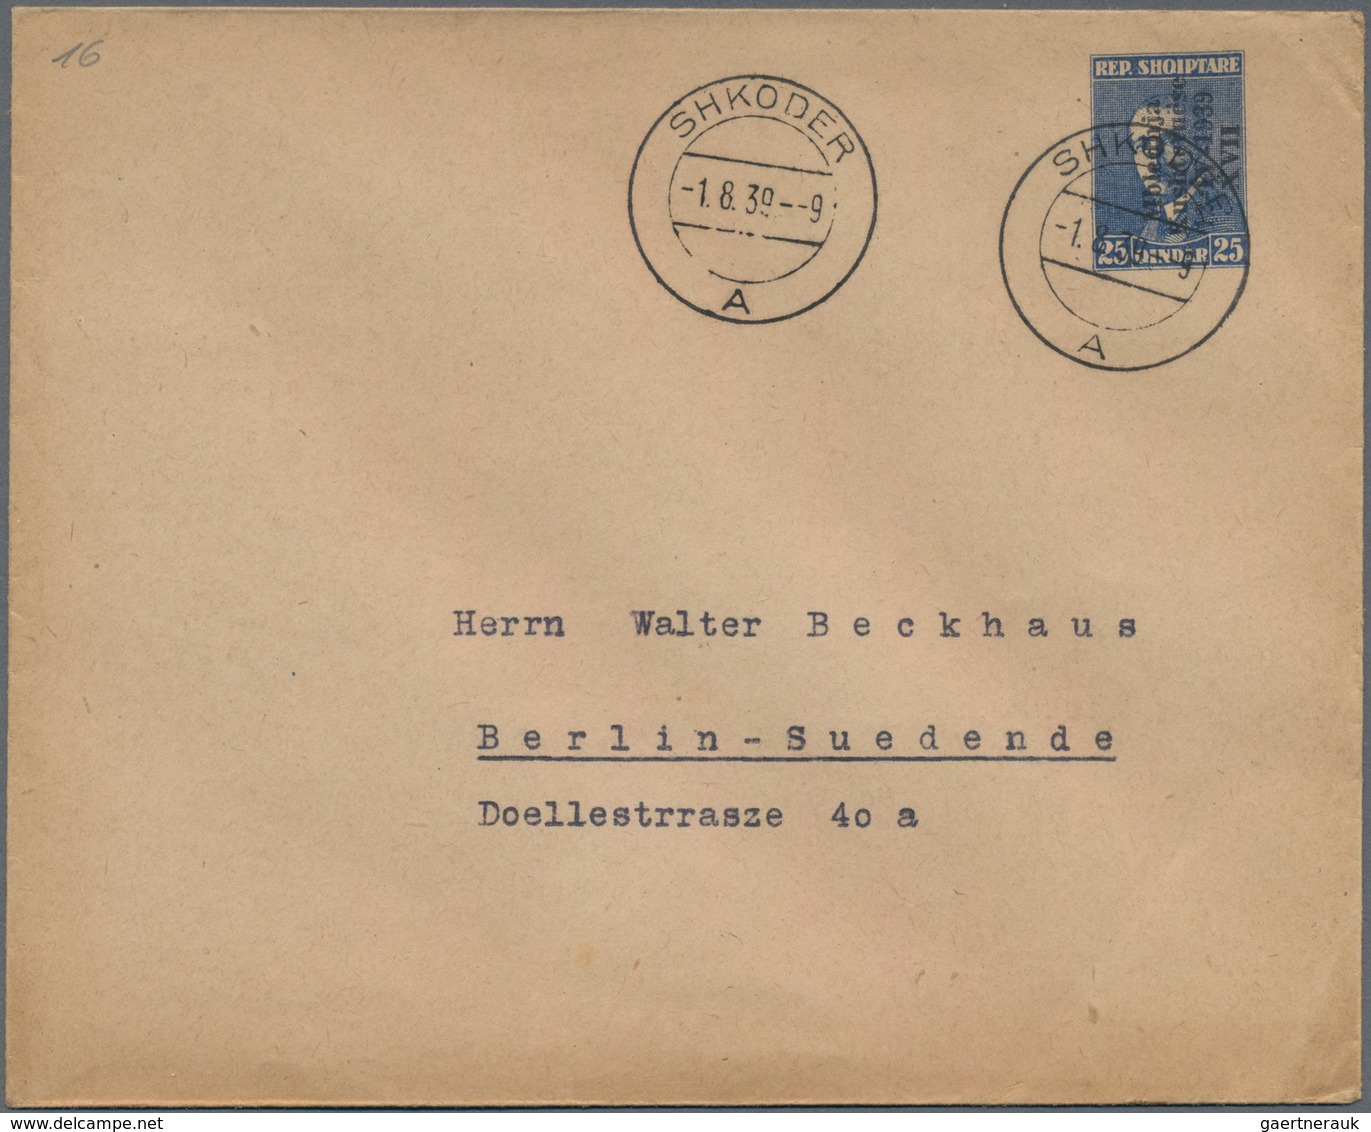 Albanien - Ganzsachen: 1939, 25 Q Blue Postal Stationery Cover With Overprint Cancelled "SHKODER" To - Albanien